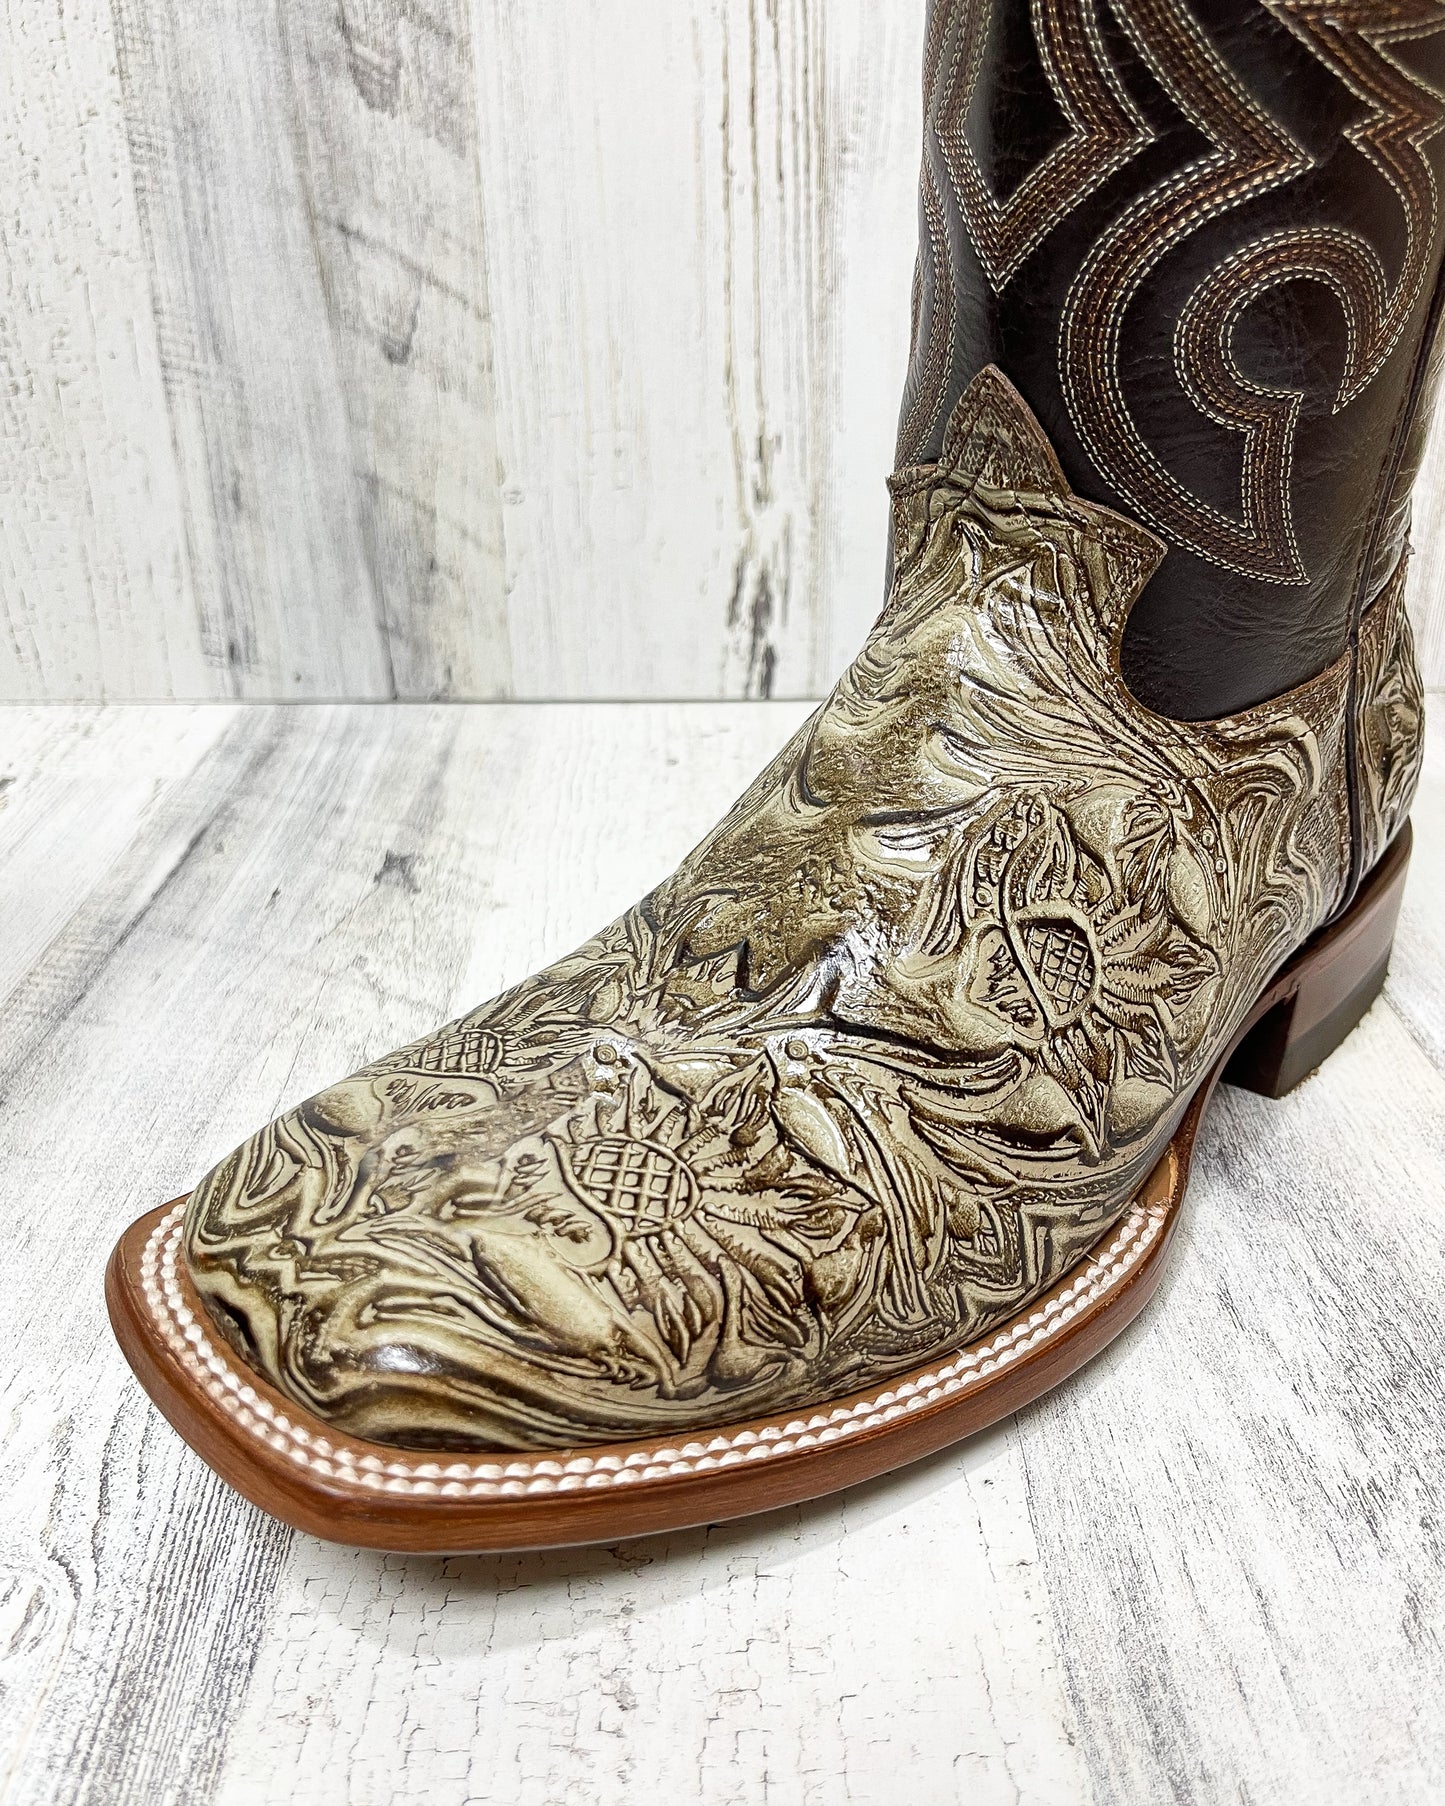 "COCOA" TOOLED LEATHER | MEN SQUARE TOE WESTERN COWBOY BOOTS